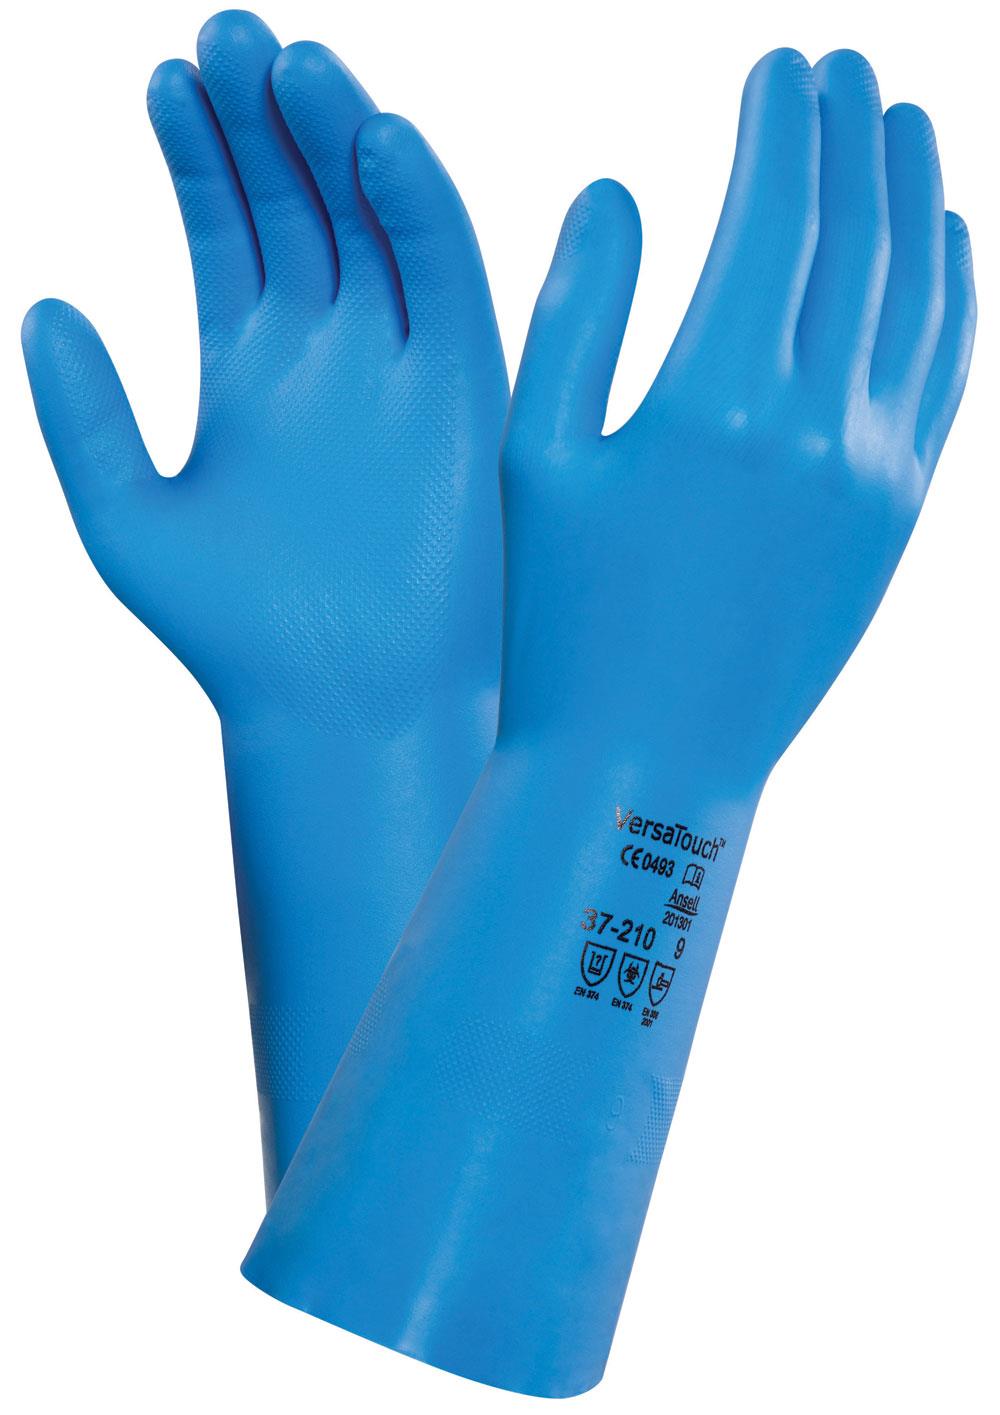 ANSELL VERSATOUCH 12" BLUE NITRILE 8 MIL